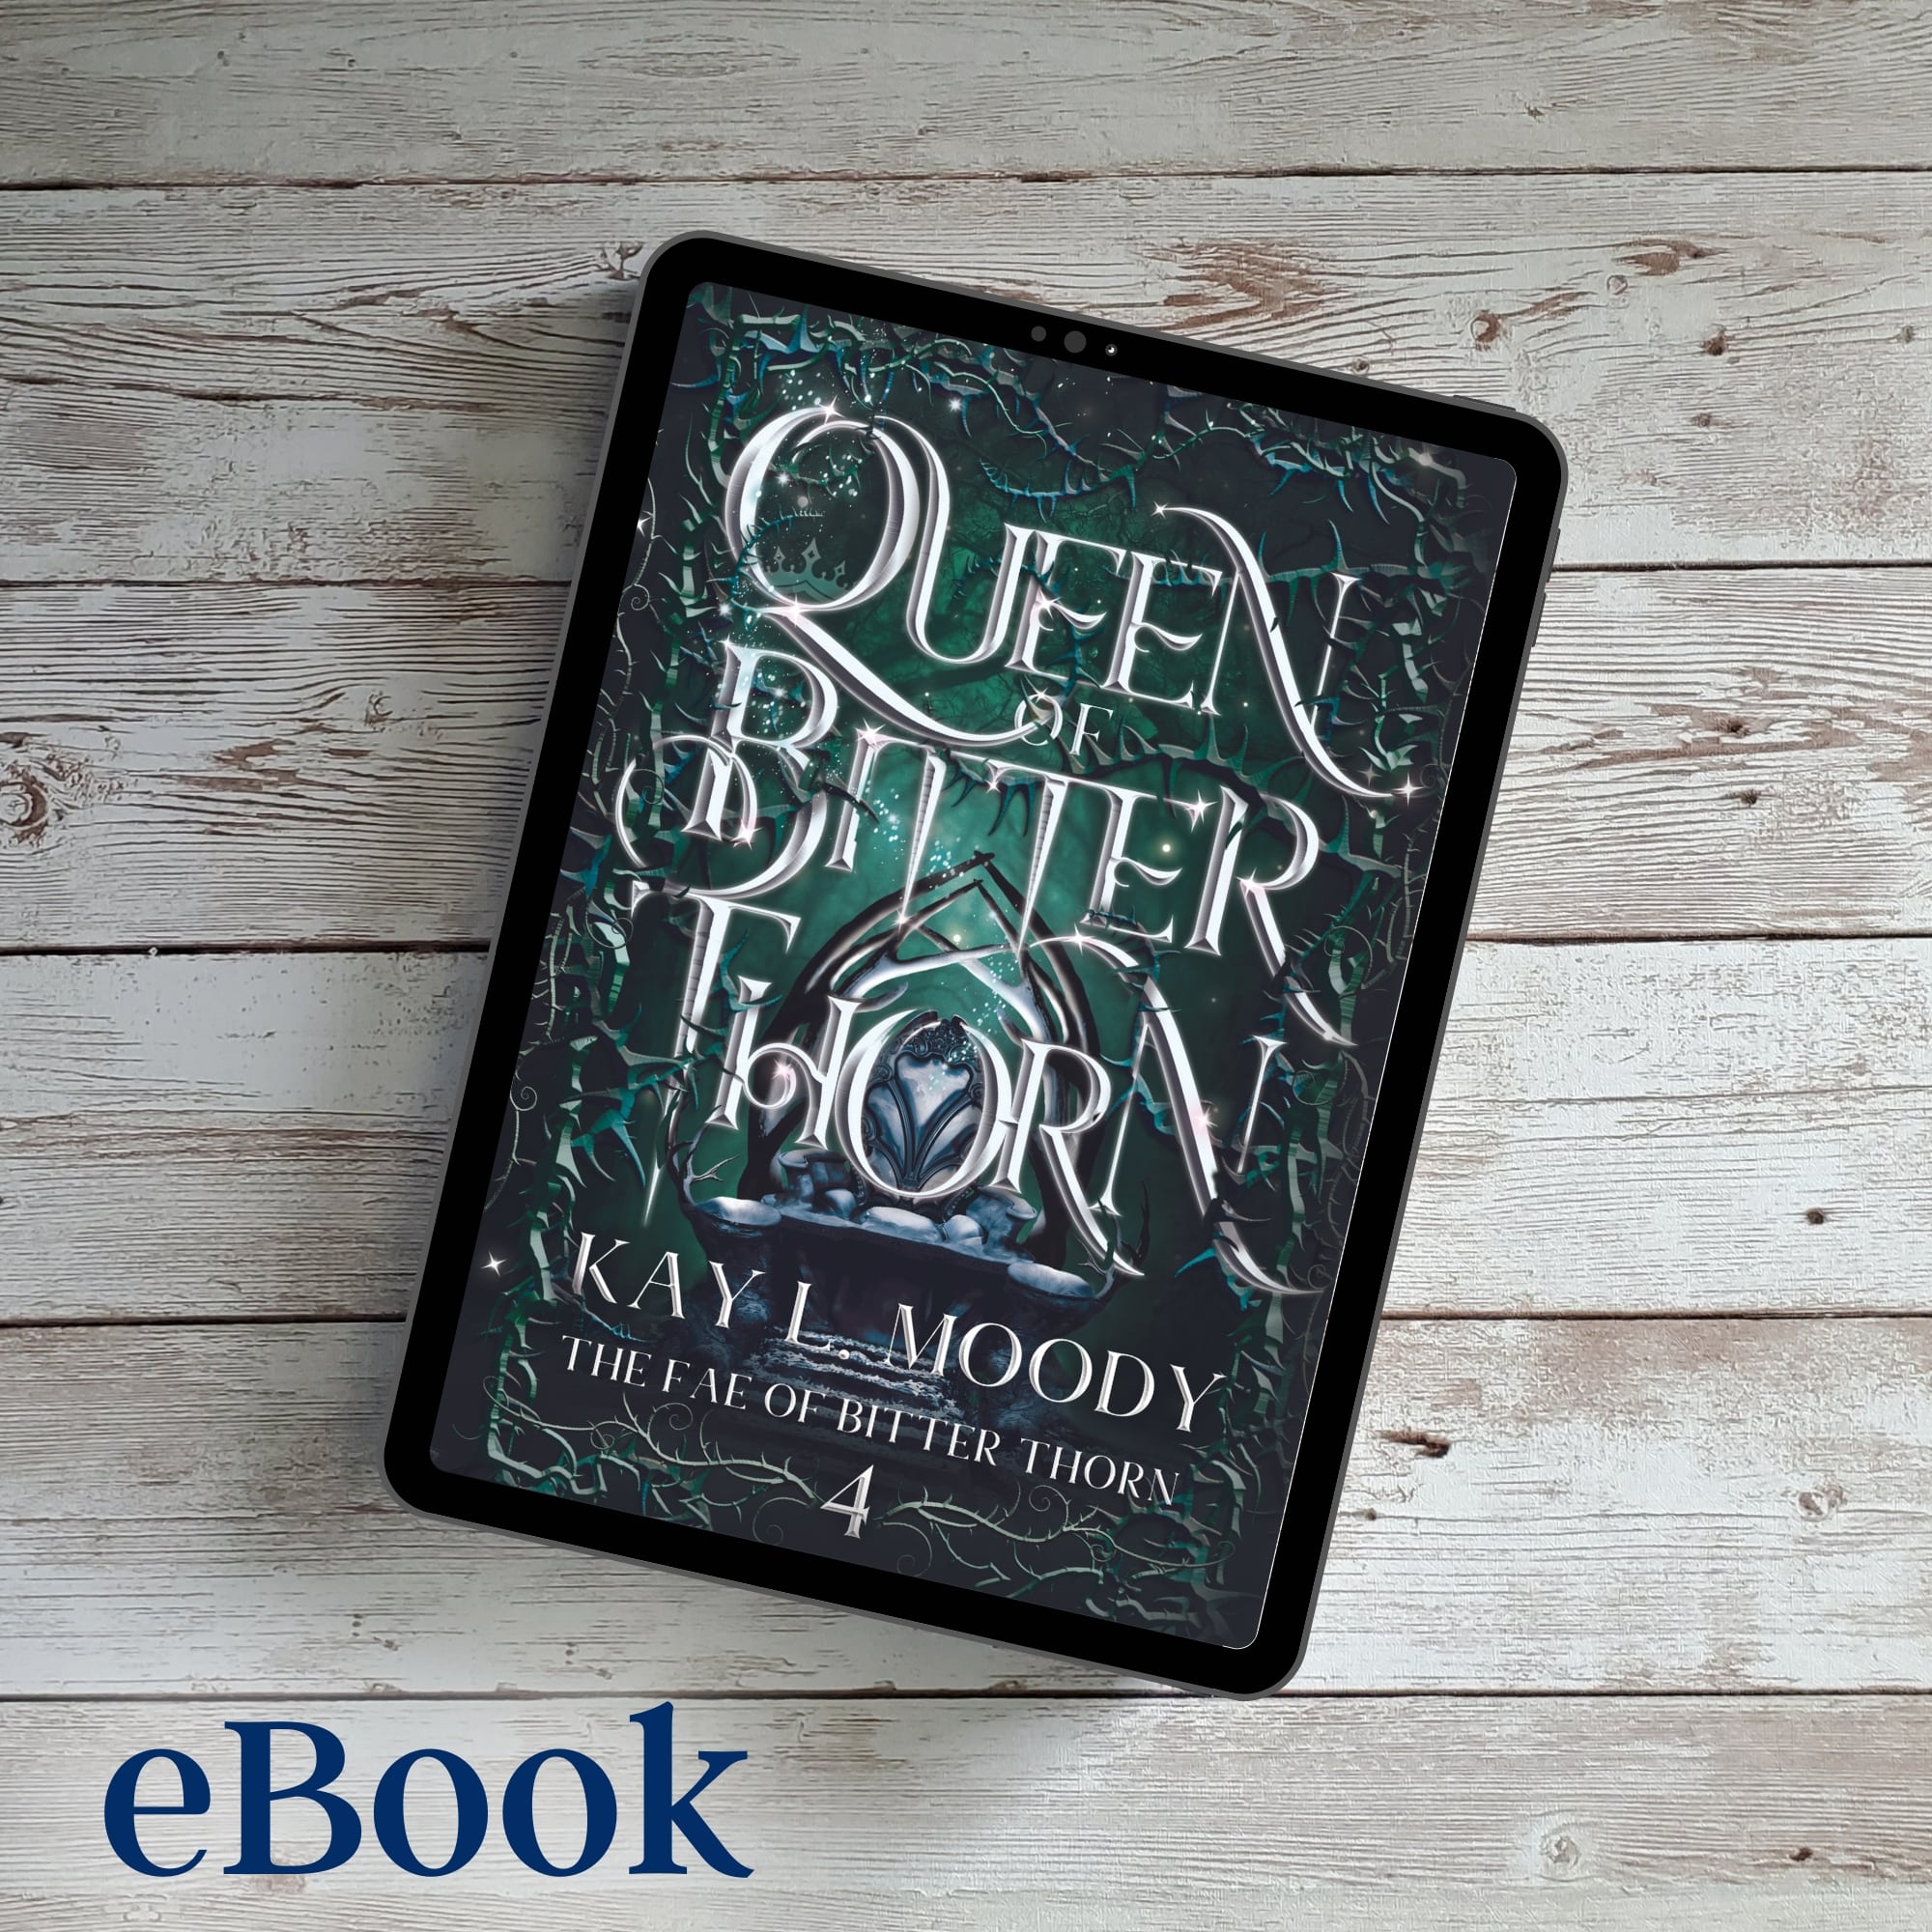 Queen of Bitter Thorn (The Fae of Bitter Thorn, #4)